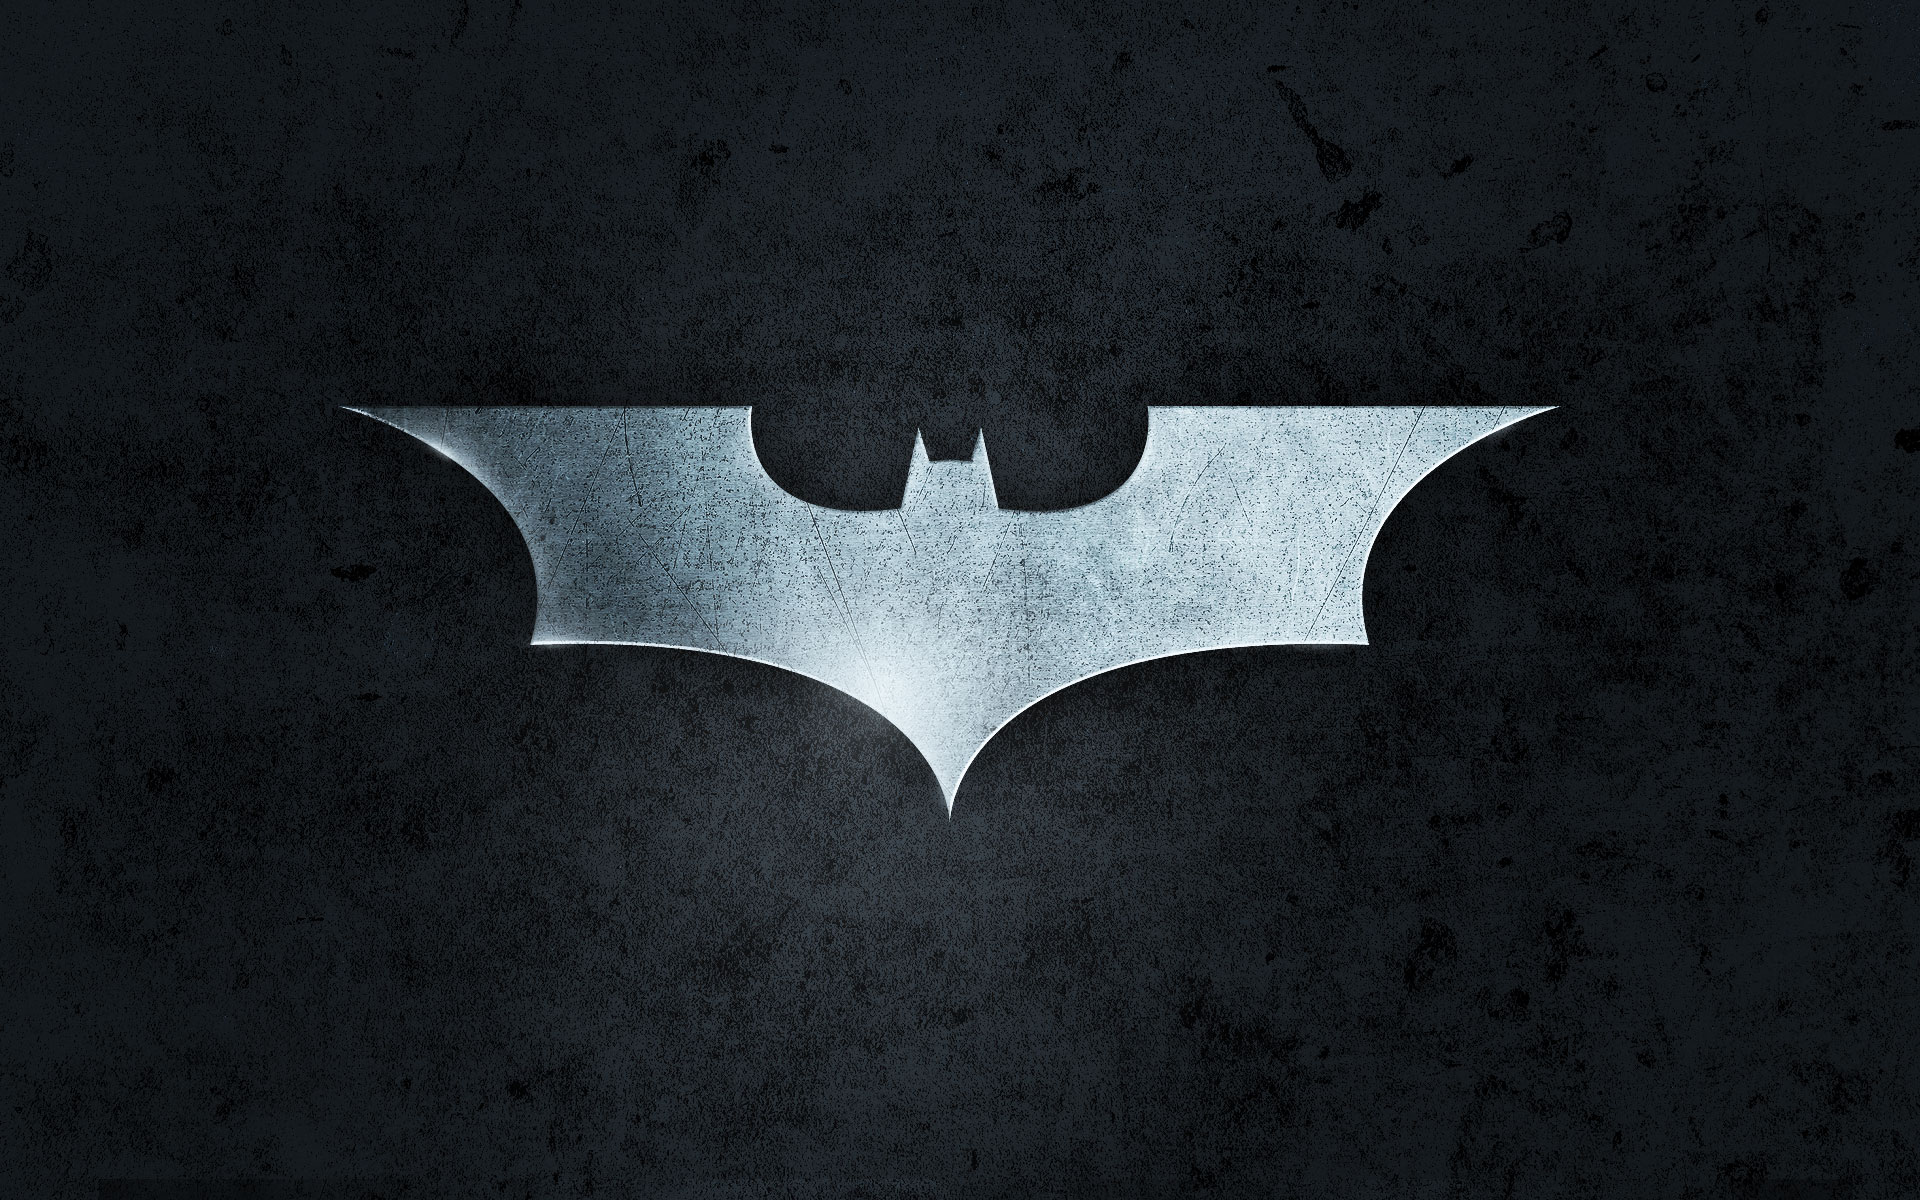 Create A Dark Knight Rises Style Wallpaper In Easy Steps